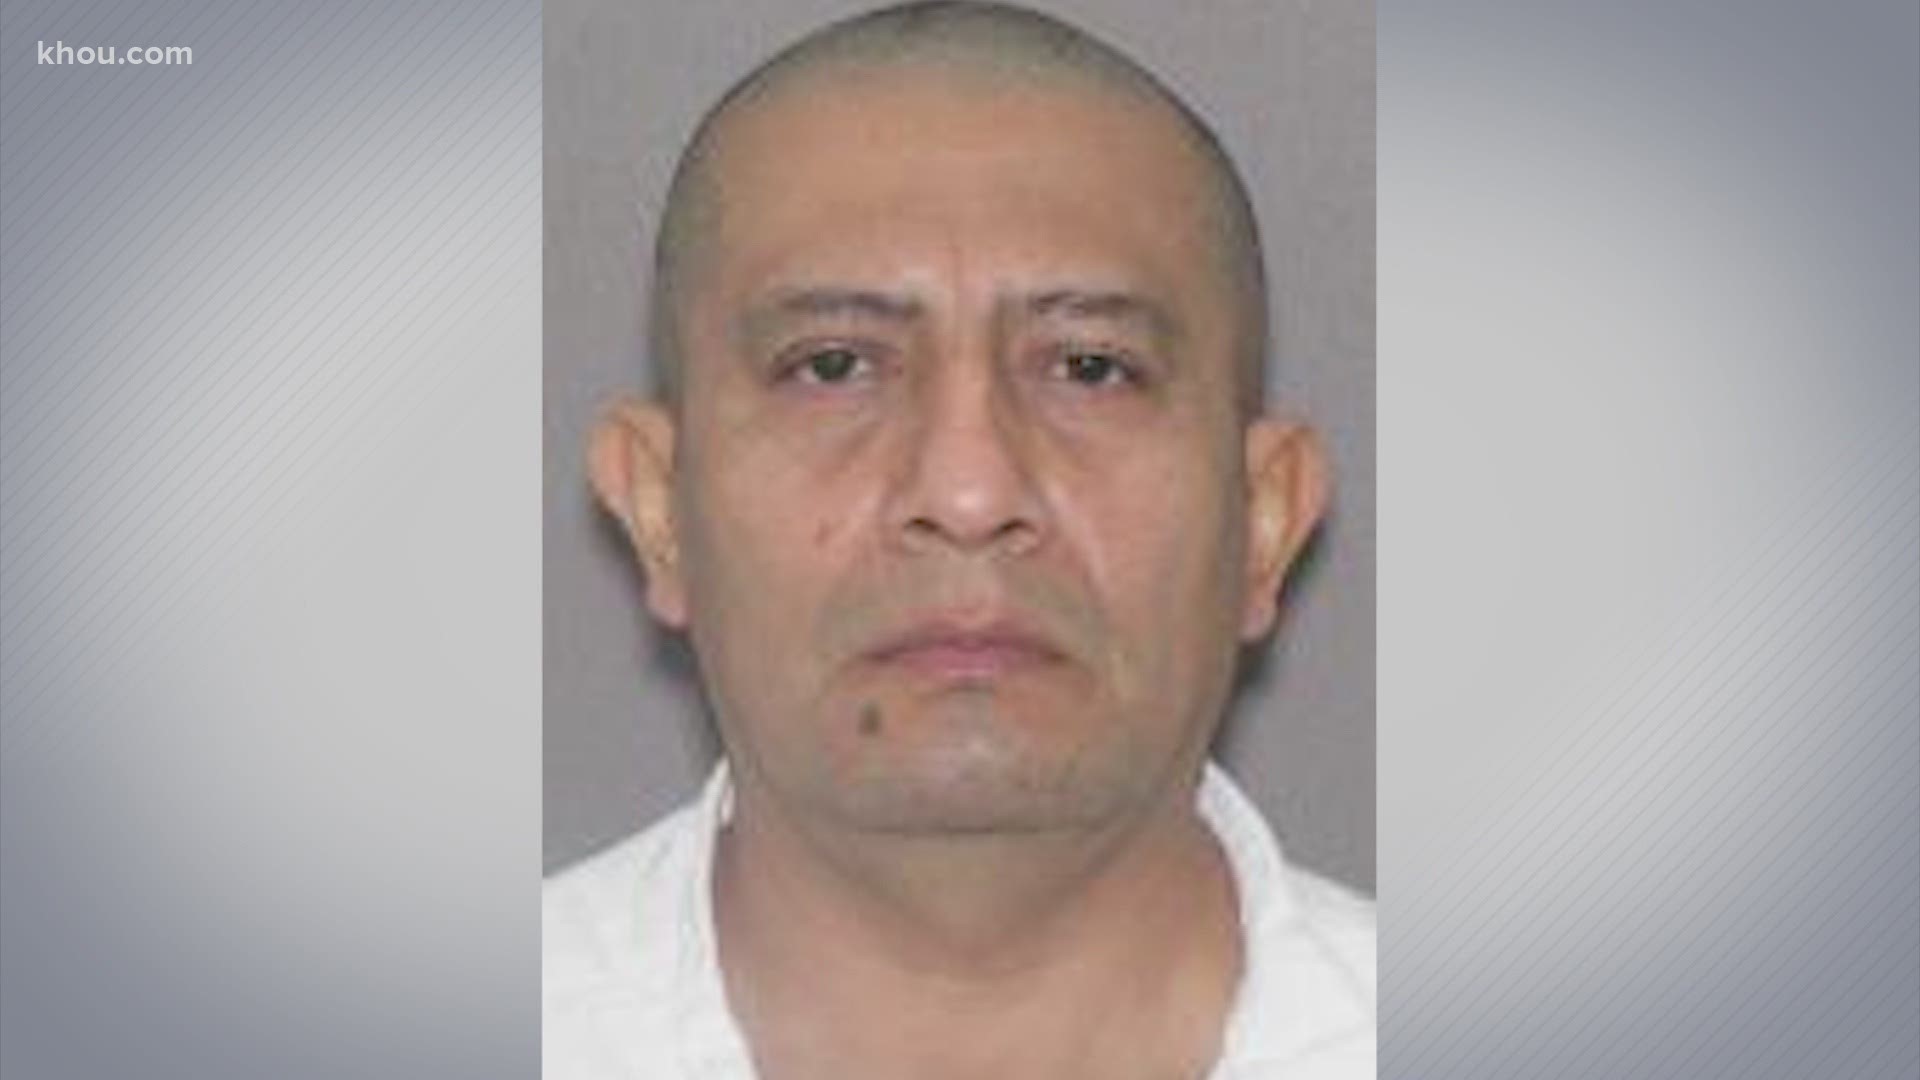 The apprehension of 59-year-old Jose Marin Soriano has been turned over the U.S. Marshal's Office.